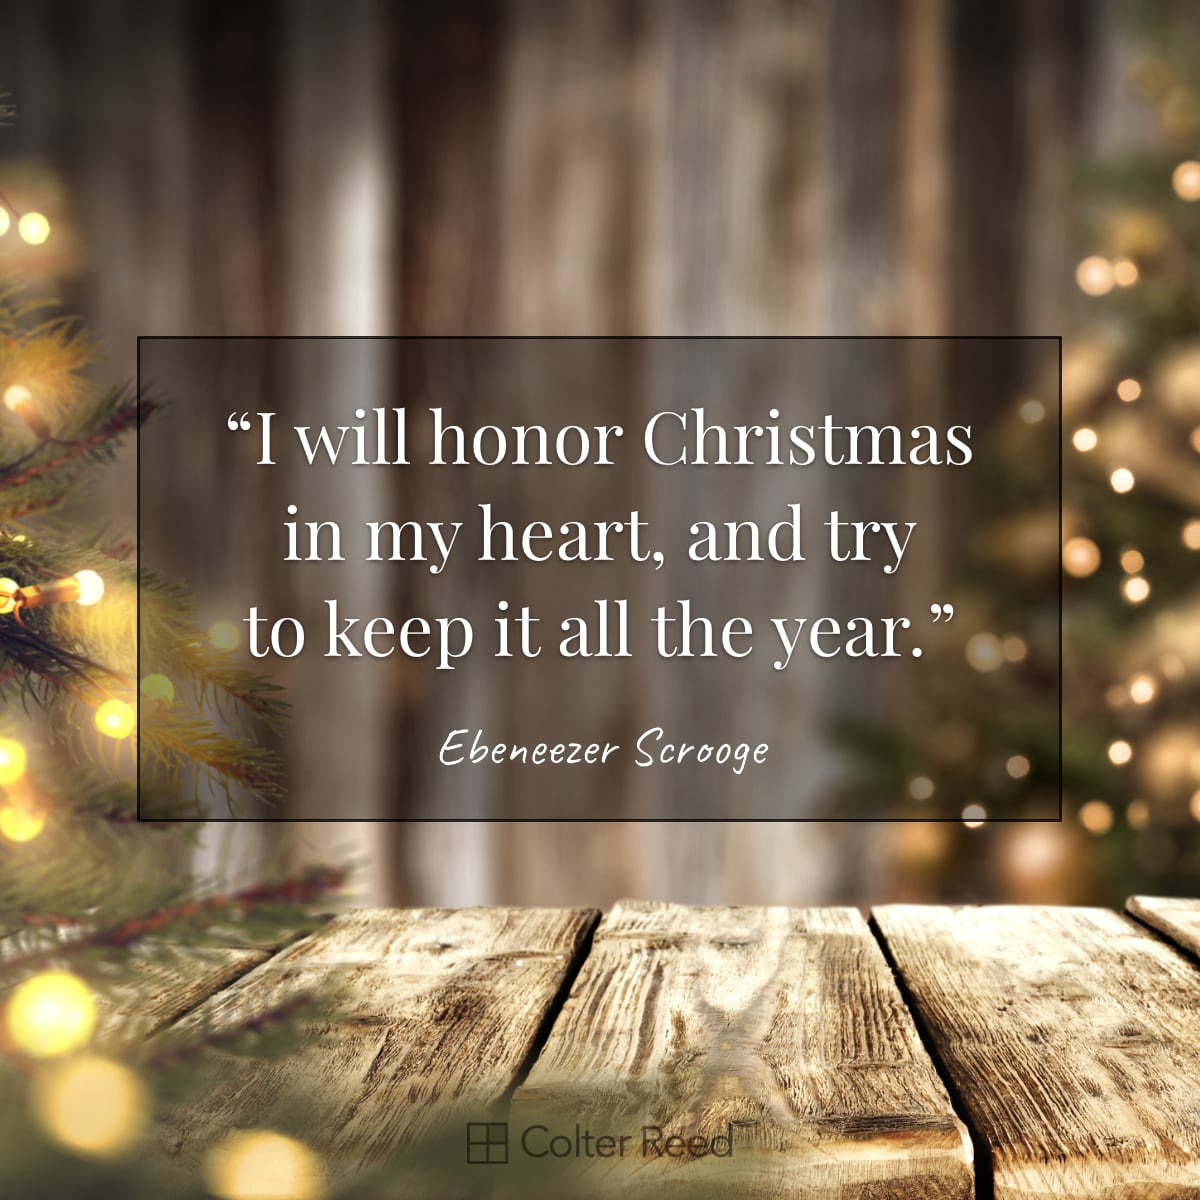 I will honor Christmas in my heart, and try to keep it all the year. —Ebeneezer Scrooge